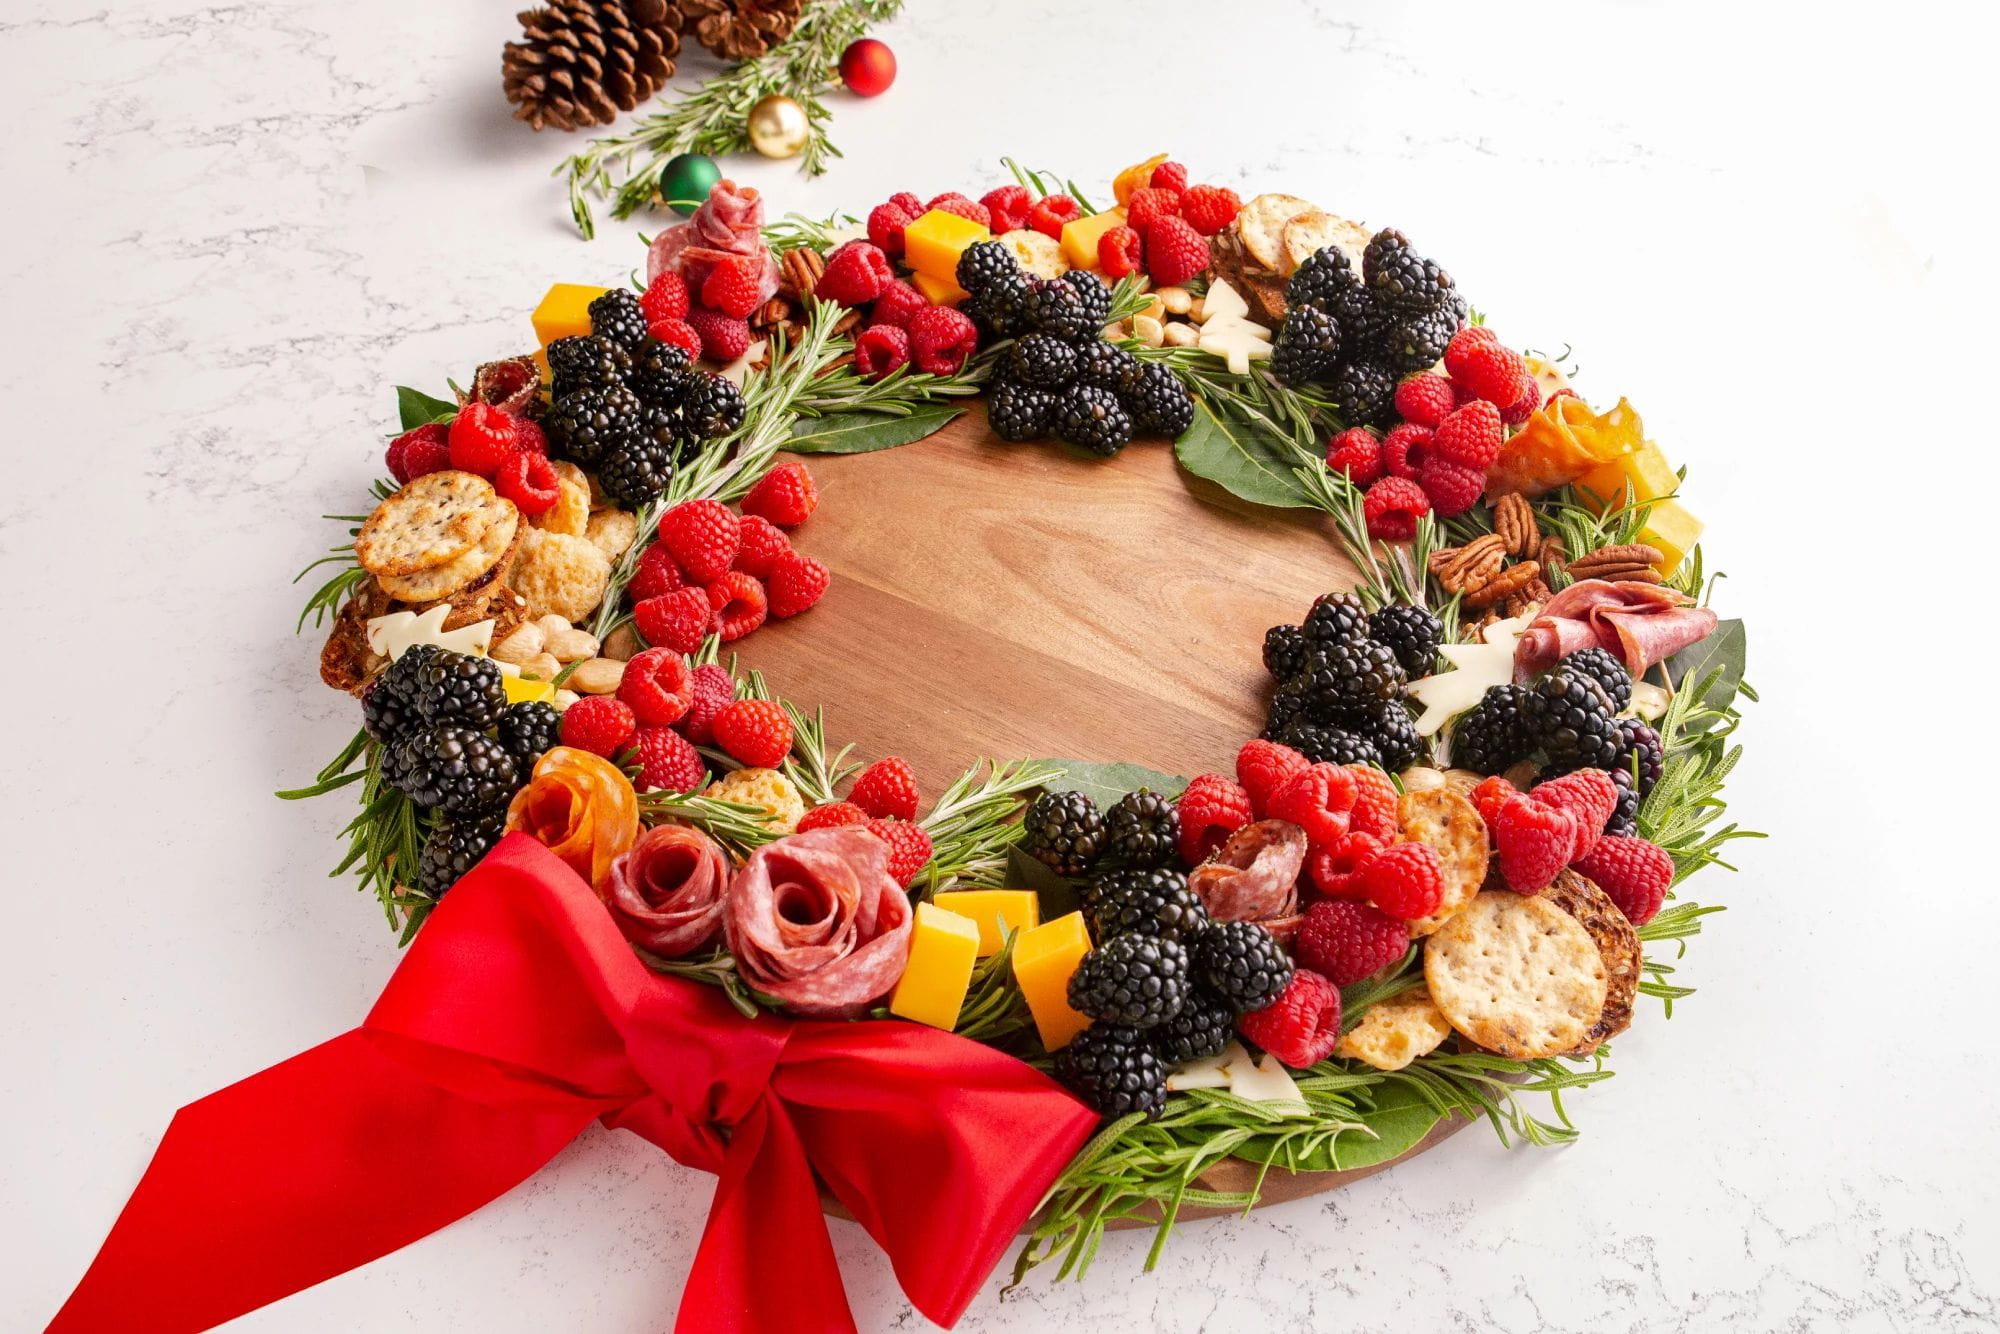 Festive Christmas Wreath Cheese Platter - Perfect for Holiday Parties!